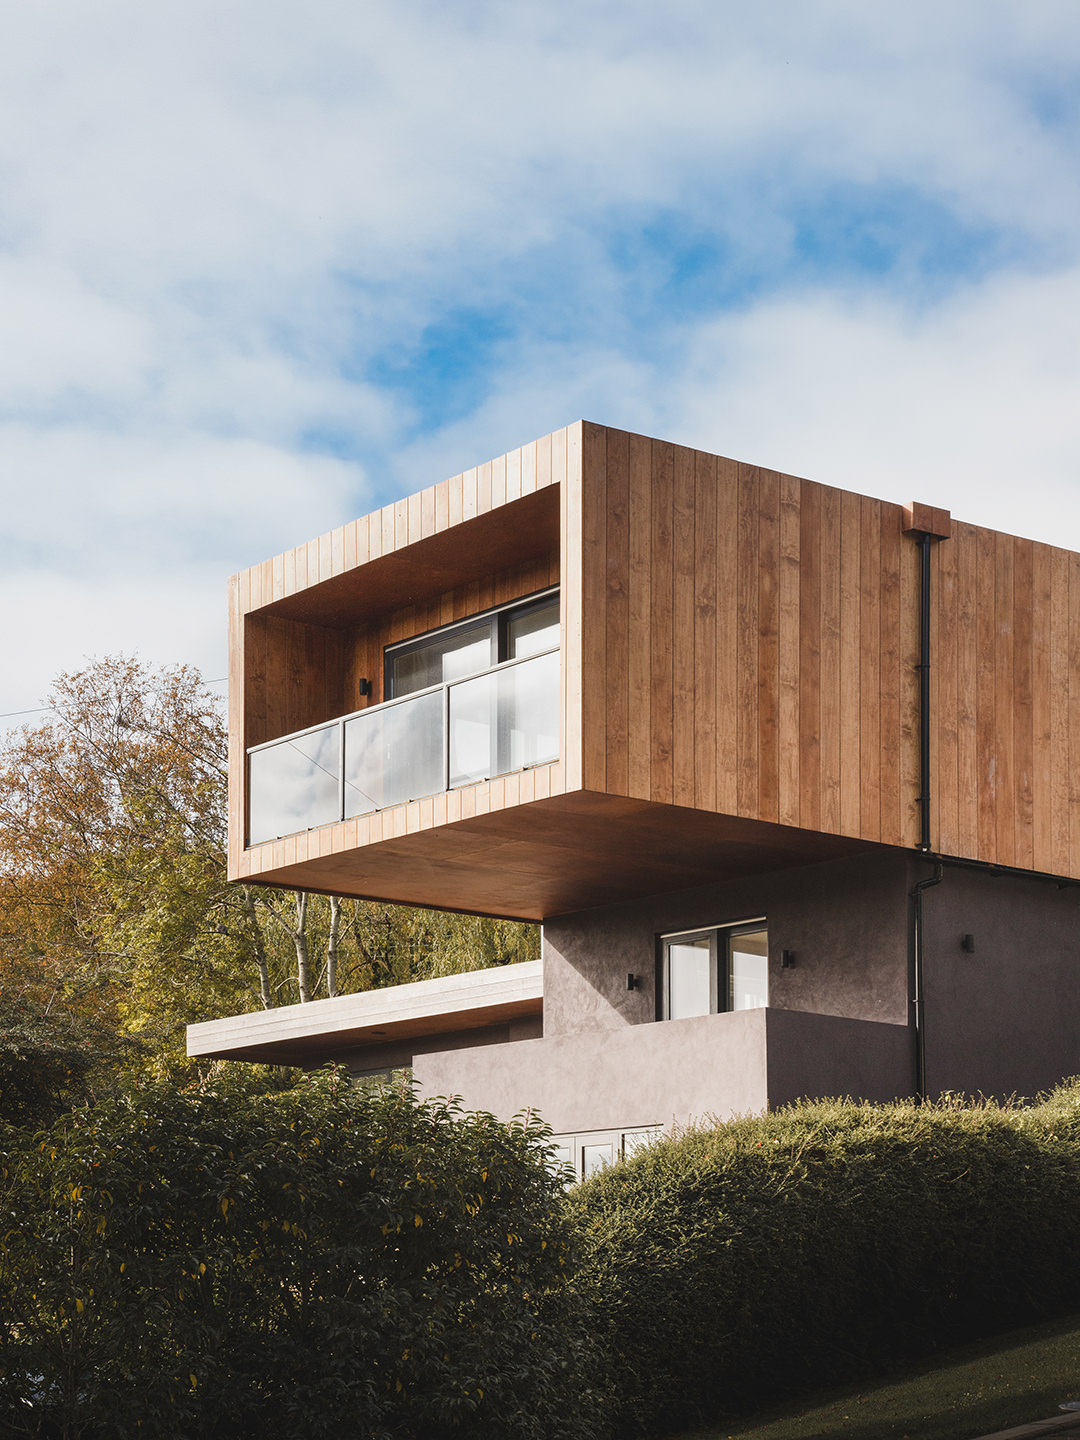 A wooden clad geometric modern building of architectural interest